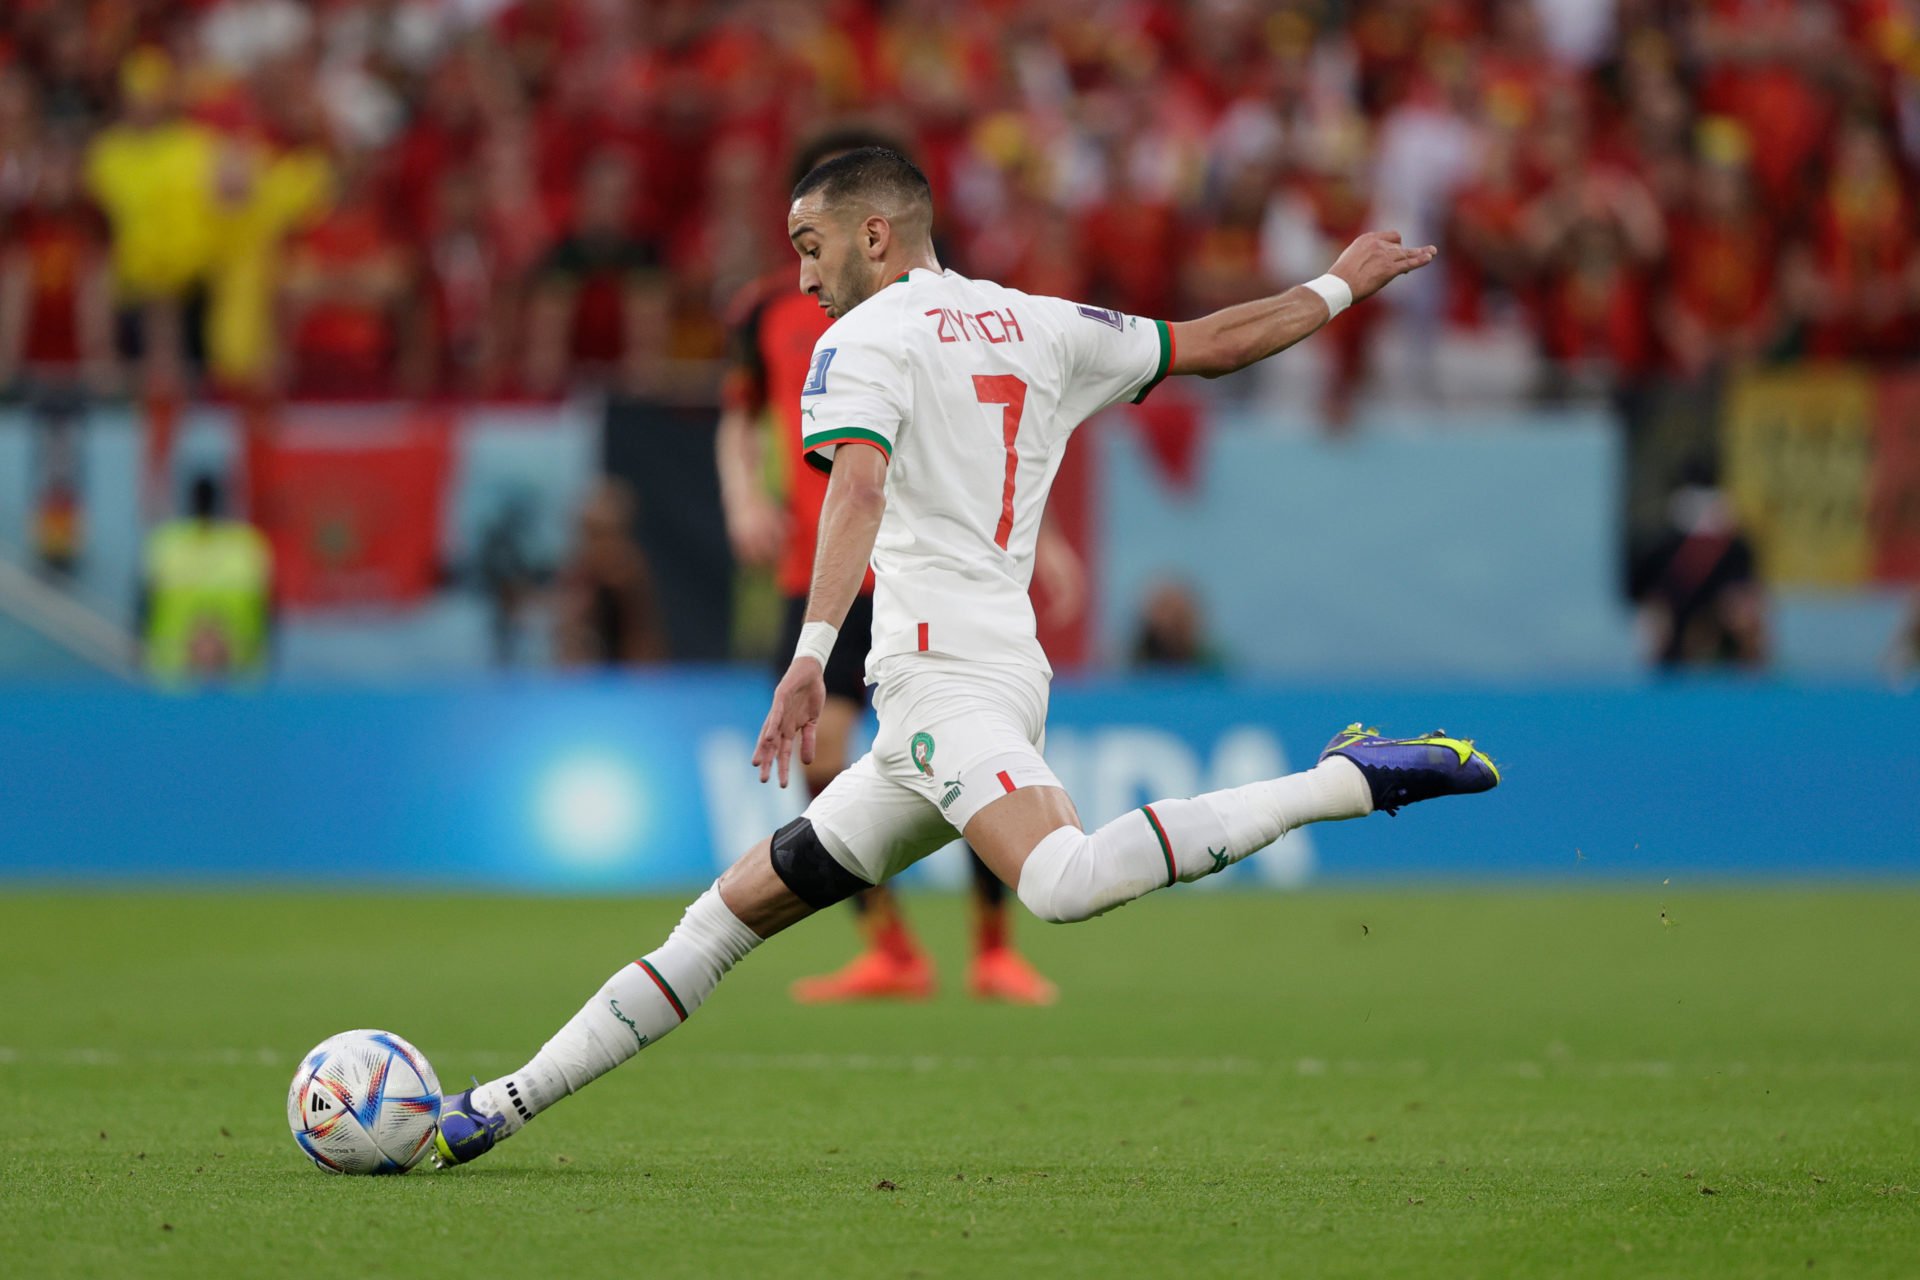 Hakim Ziyech was "phenomenal" against Belgium at the World Cup, says Pat Nevin